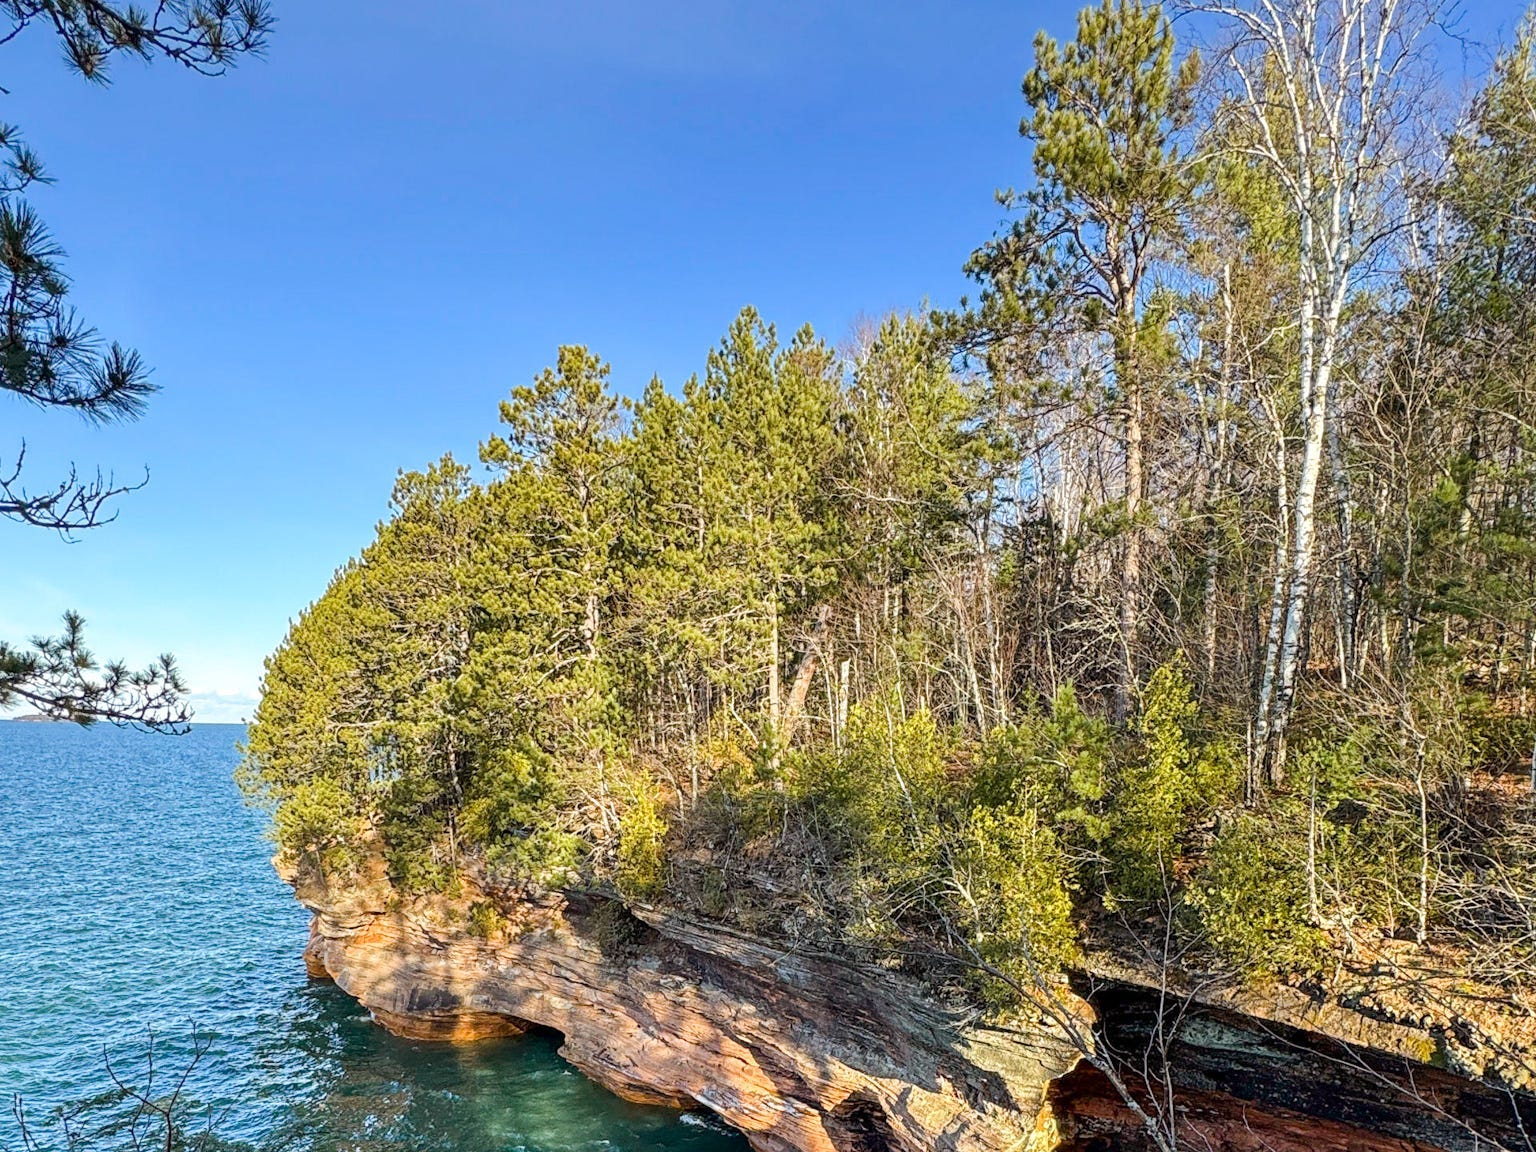 <p>Wisconsin has so much more than first meets the eye, from the natural beauty of the Apostle Islands and the <a href="https://dnr.wisconsin.gov/topic/Lakes">15,000 lakes</a> in the state to the classic cheese curds, breweries, and wineries that dot the landscape.</p><p>I love spending time along the shores of <a href="https://www.businessinsider.com/ferry-ride-michigan-lake-express-review-milwaukee-muskegon-2023-8">Lake Michigan</a> and Lake Superior, dining at one of the state's famous supper clubs, and exploring the many Wisconsin state parks.</p>